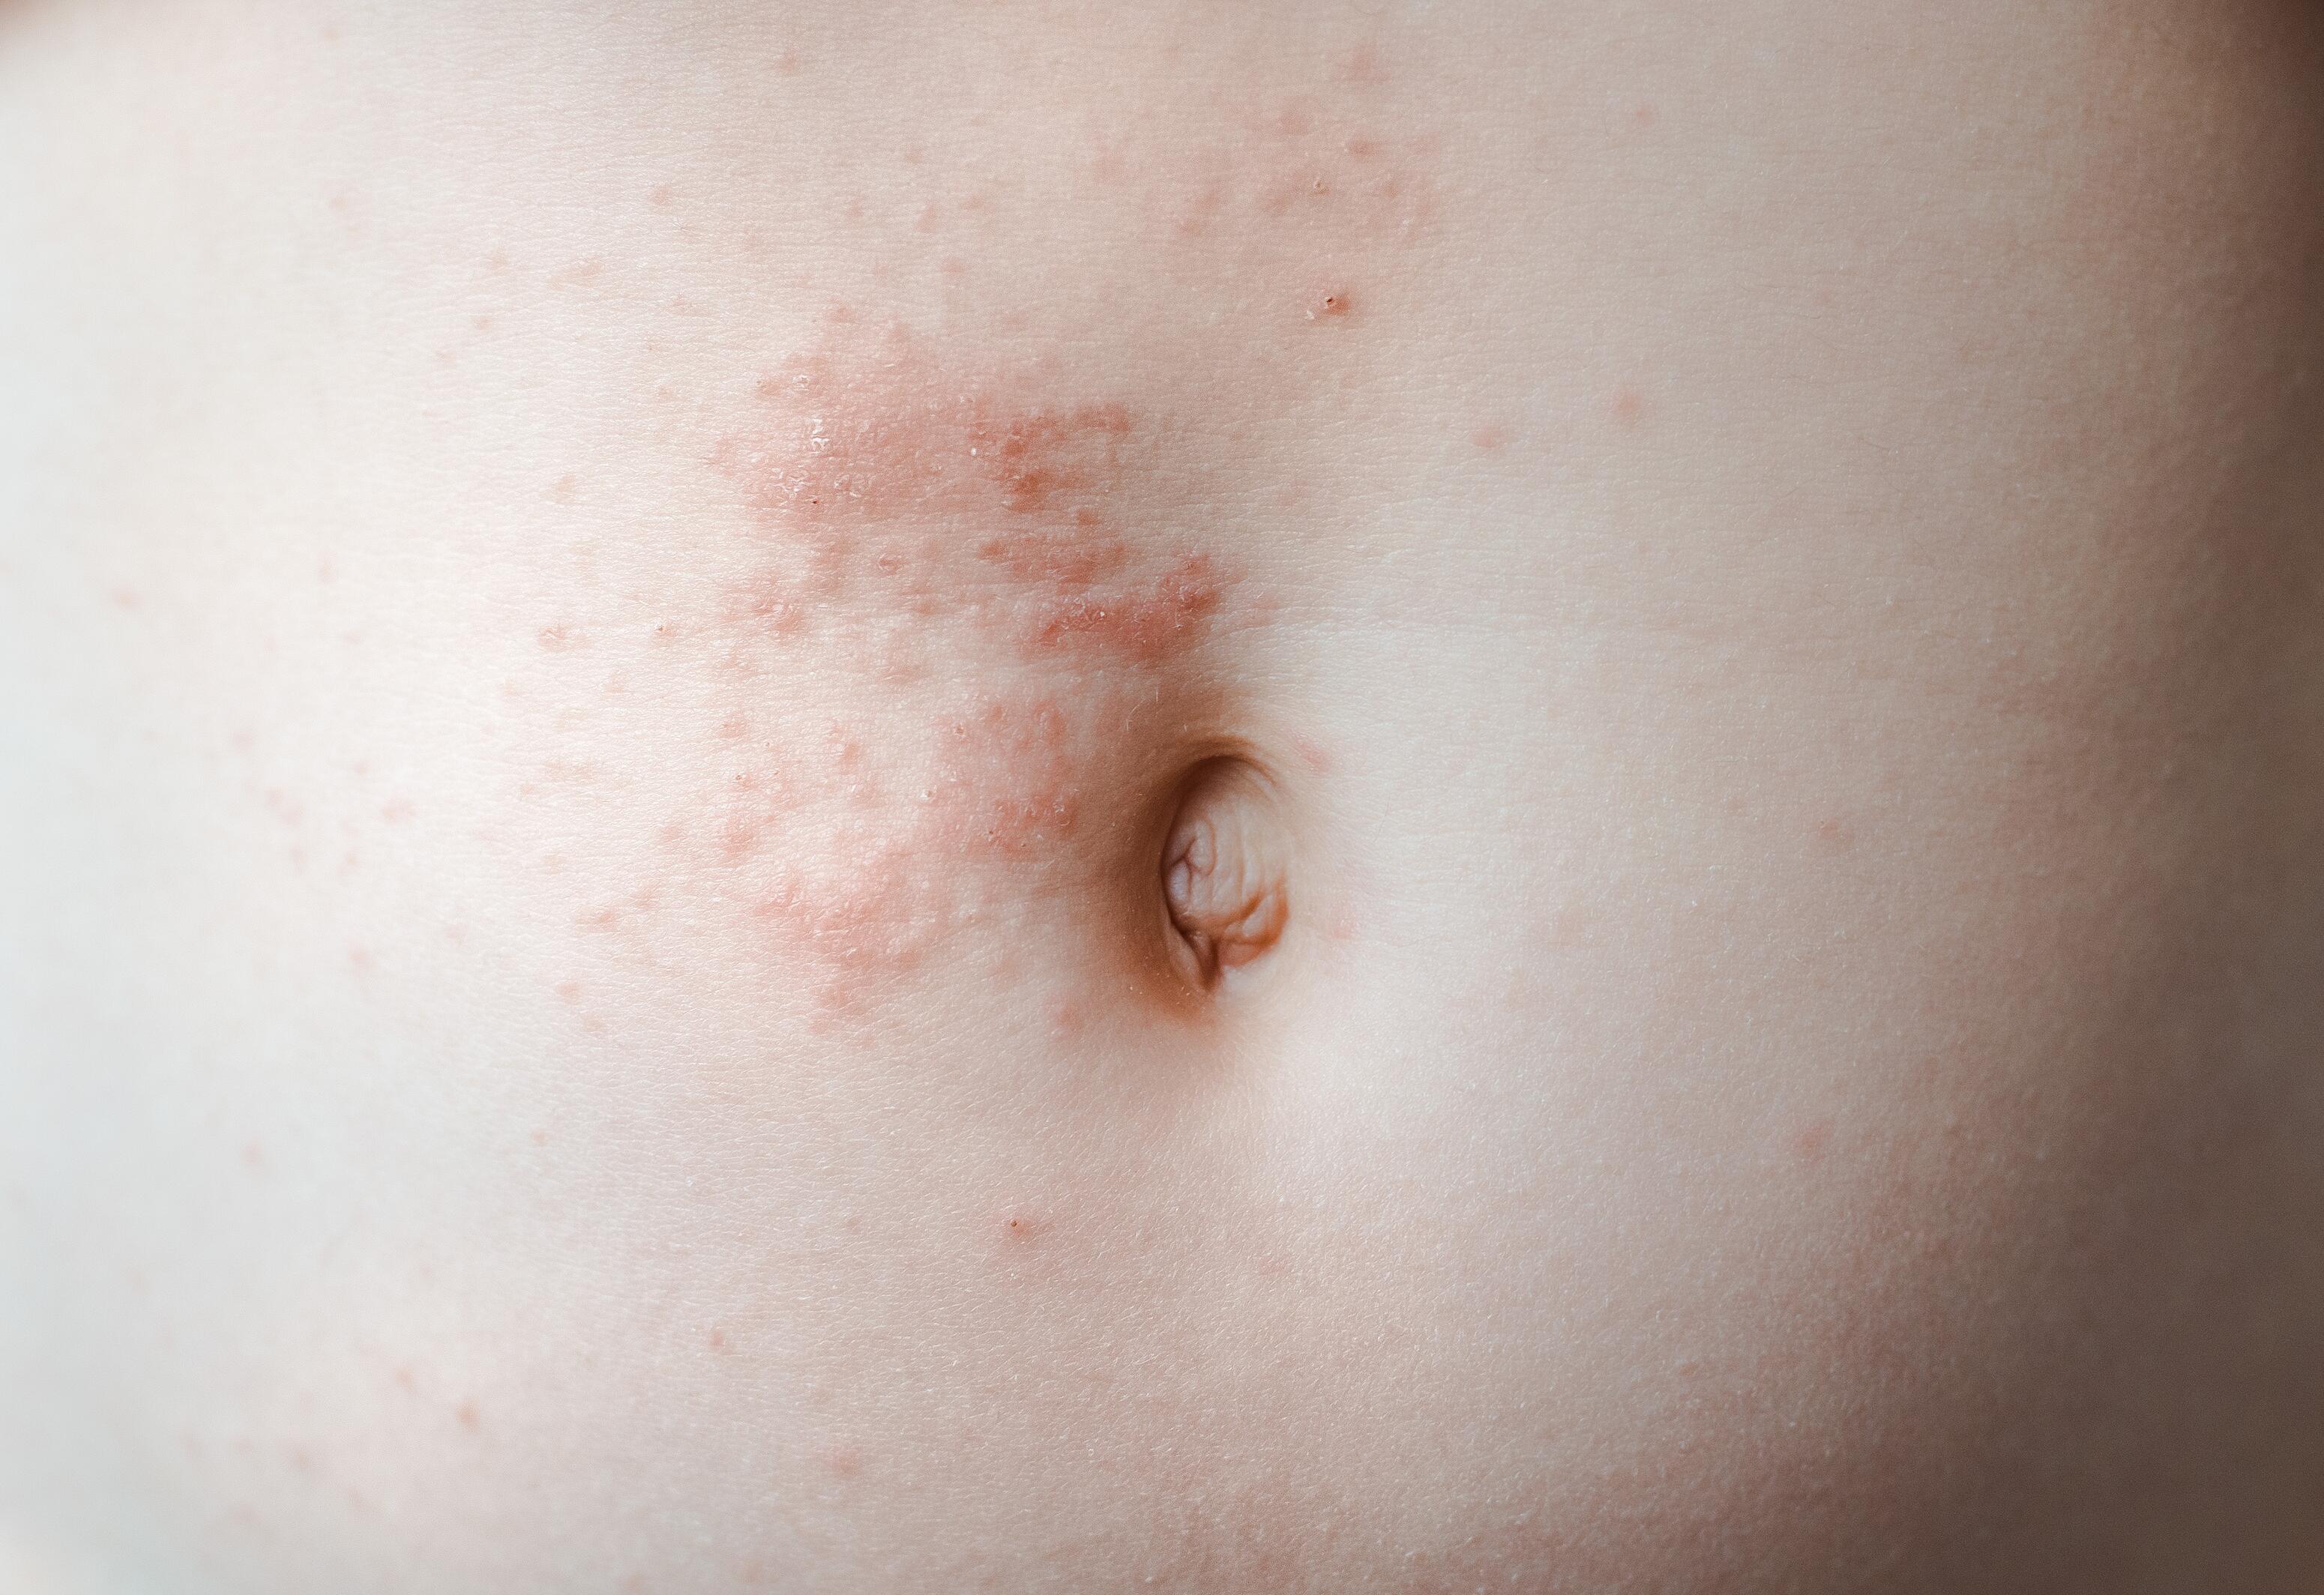 Pimples caused by scabies around the navel